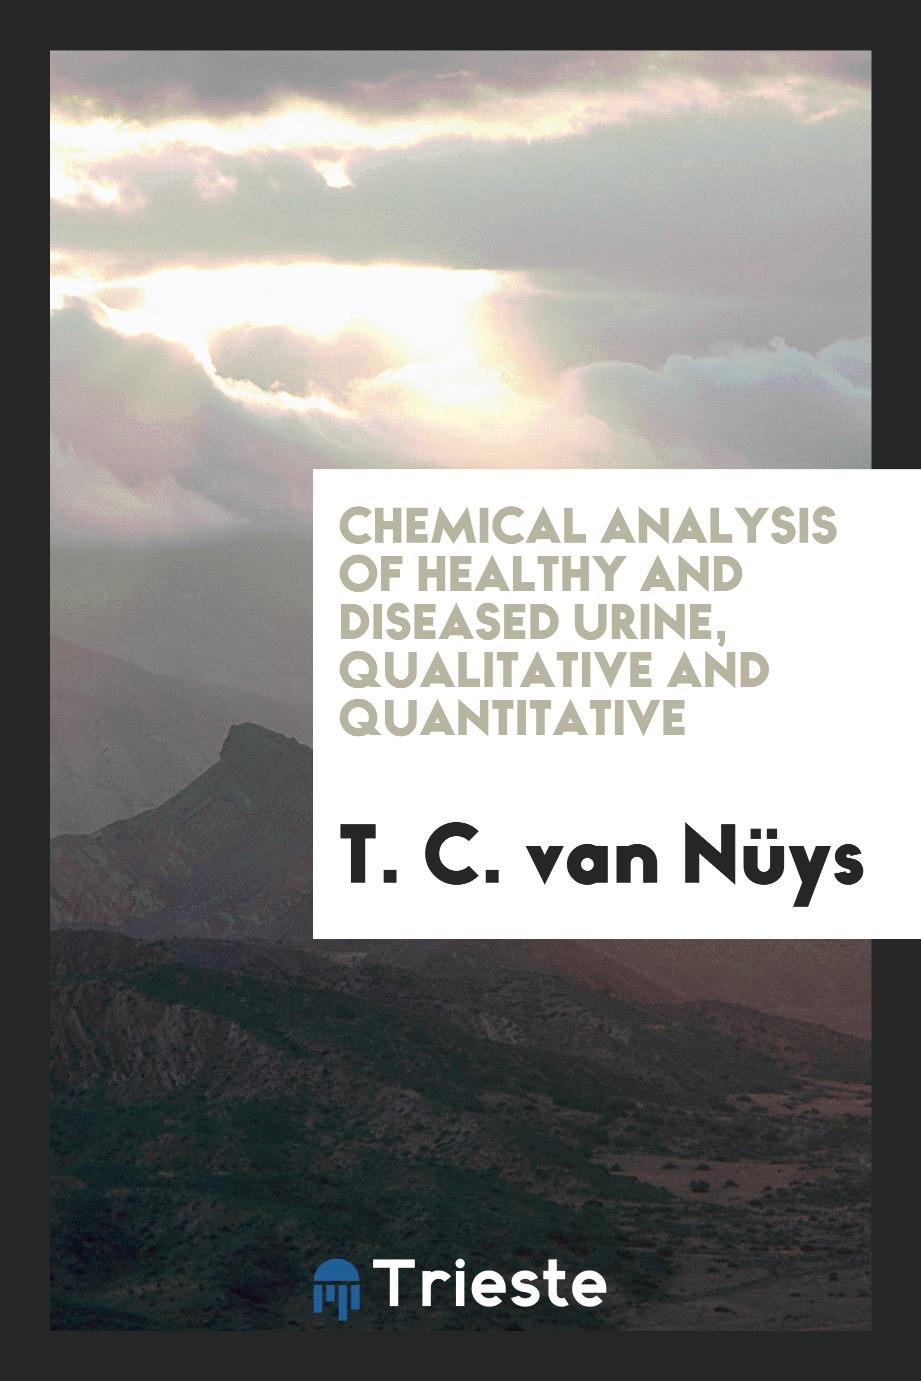 Chemical Analysis of Healthy and Diseased Urine, Qualitative and Quantitative